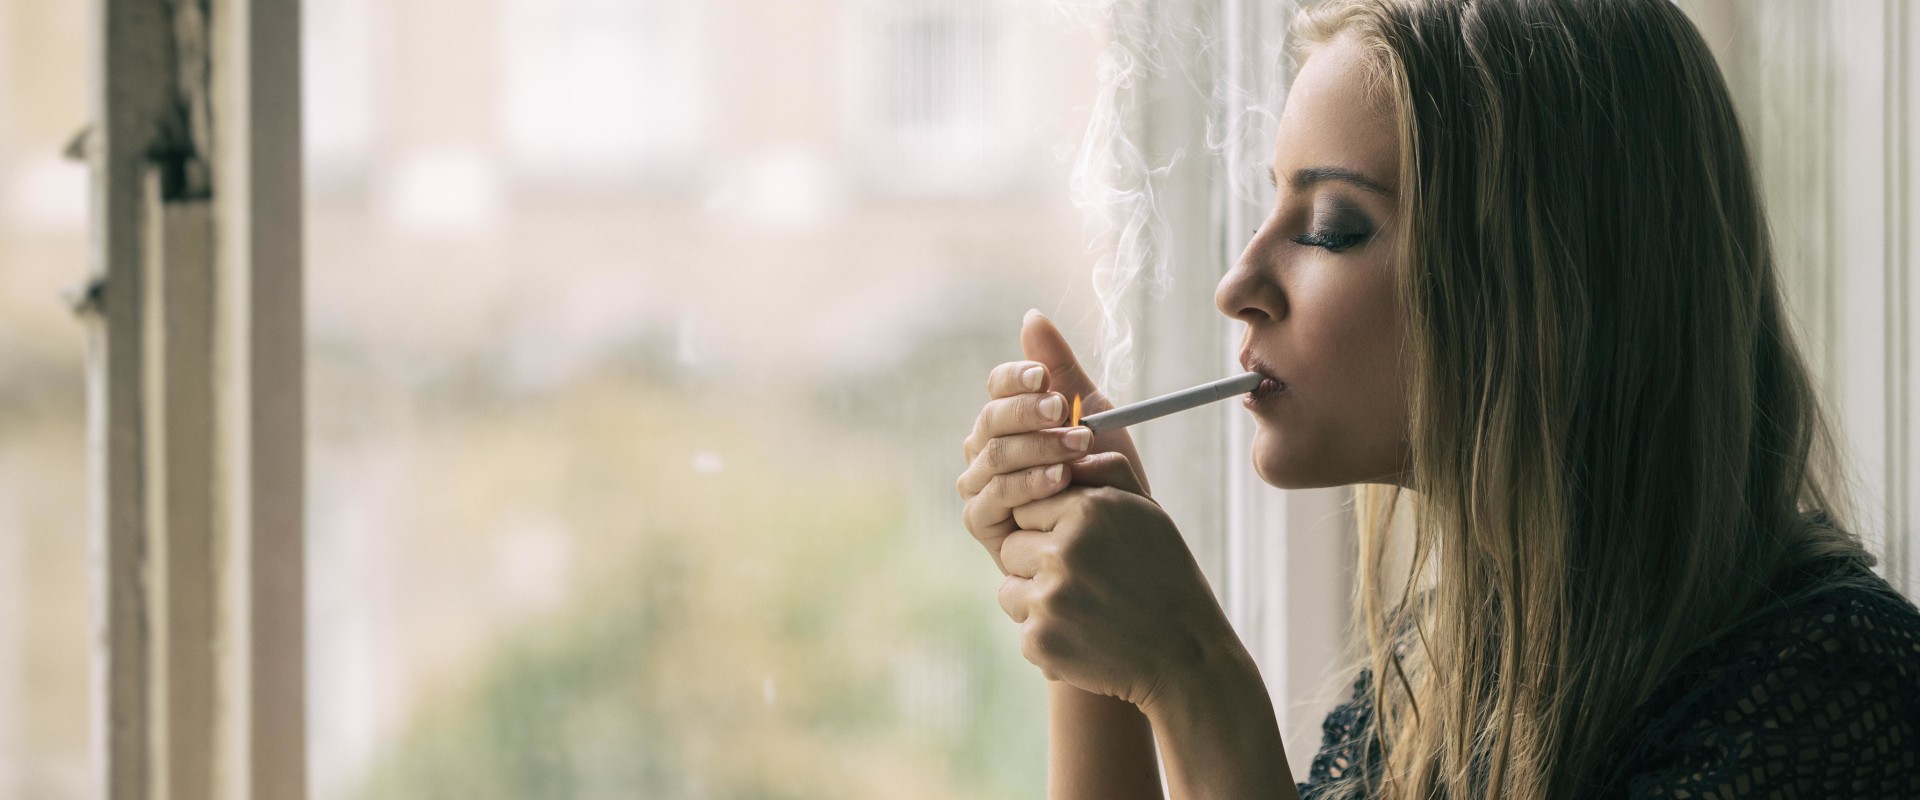 How long does it take for the lungs to fully recover after quitting smoking?